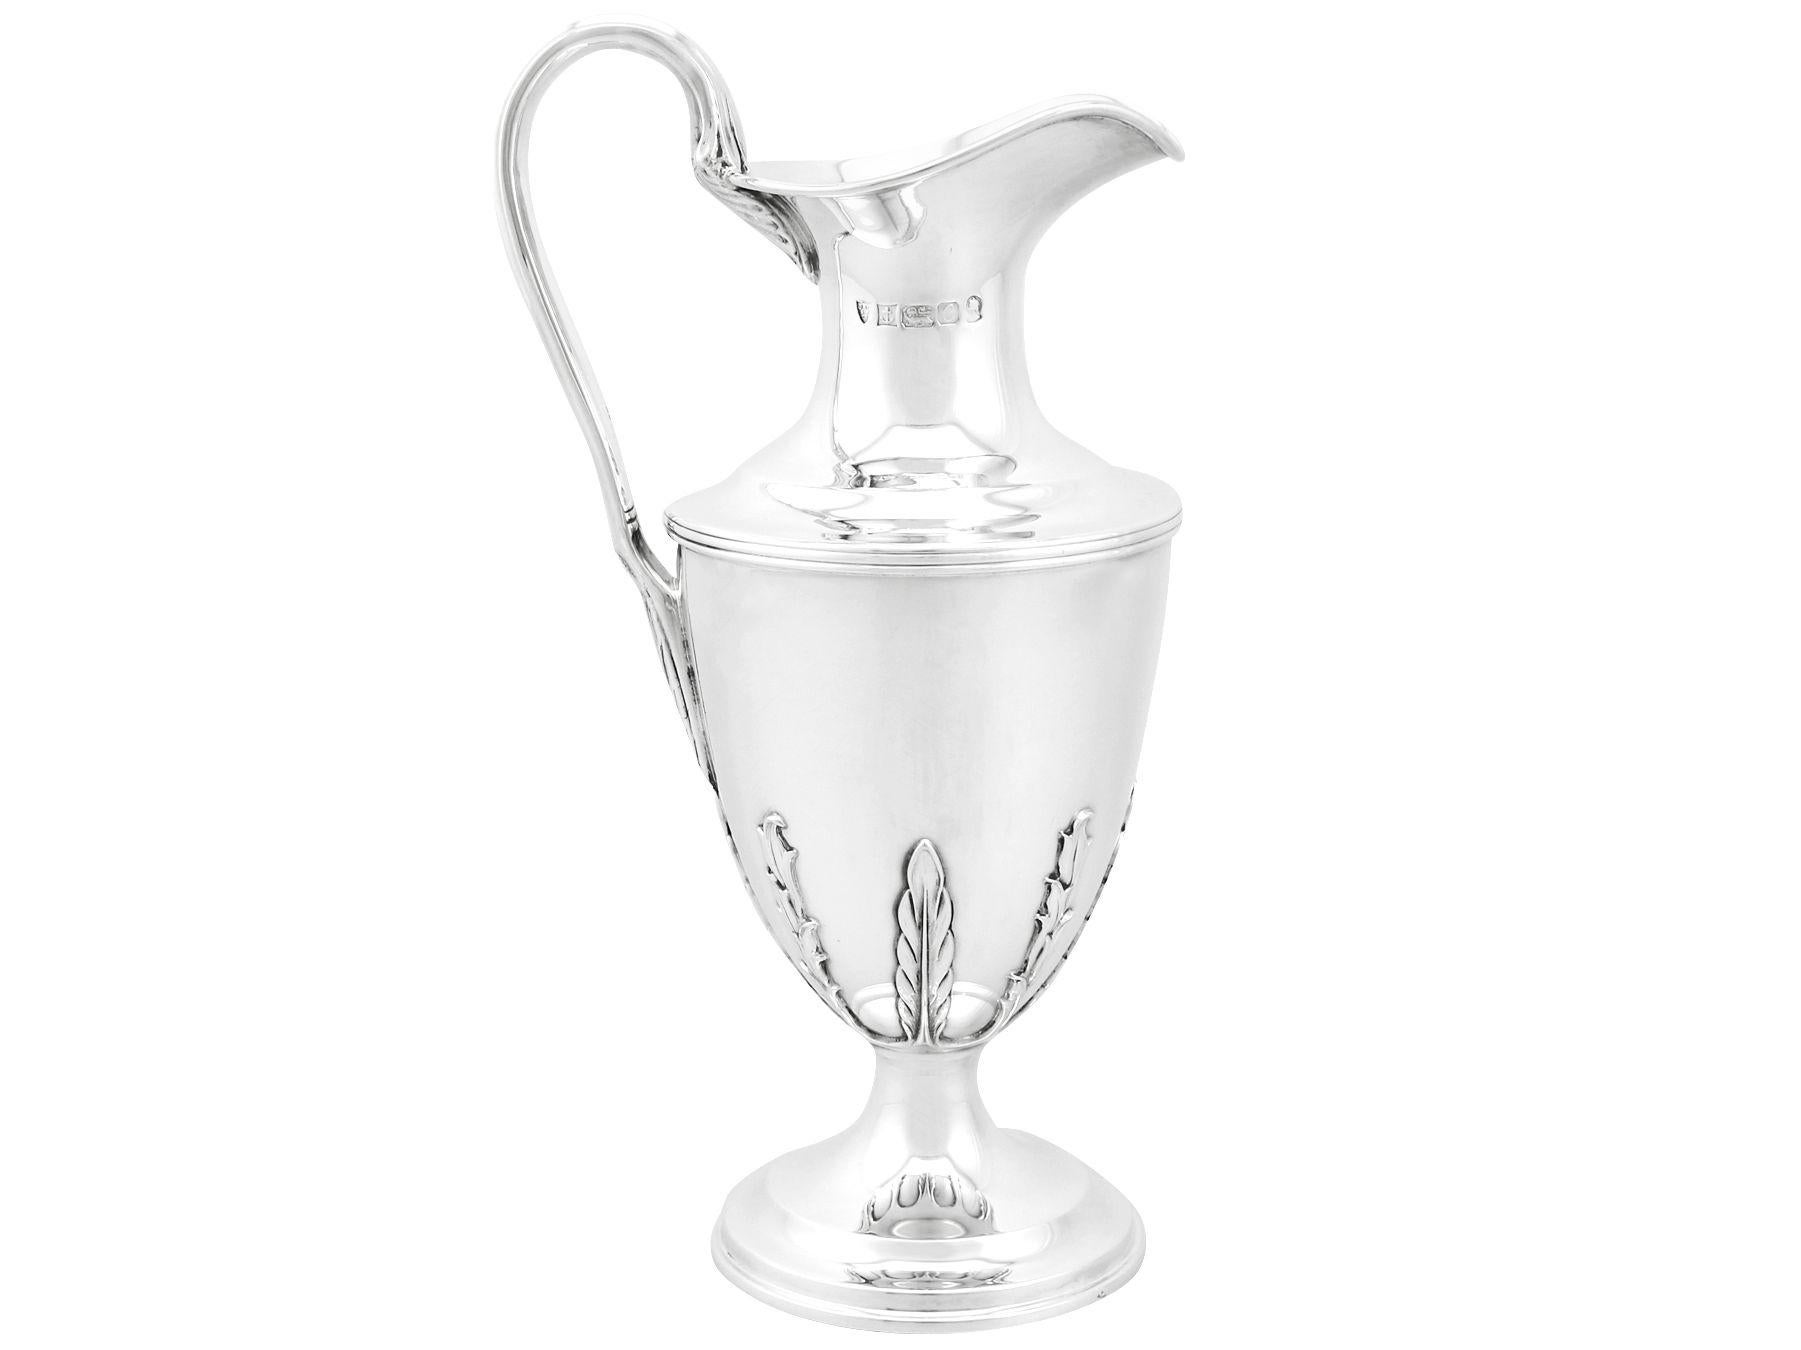 An exceptional, fine and impressive vintage Elizabeth II English sterling silver claret jug with matching goblets; an addition to our range of drinks related silverware.

This exceptional Victorian sterling silver set consists of a claret jug and